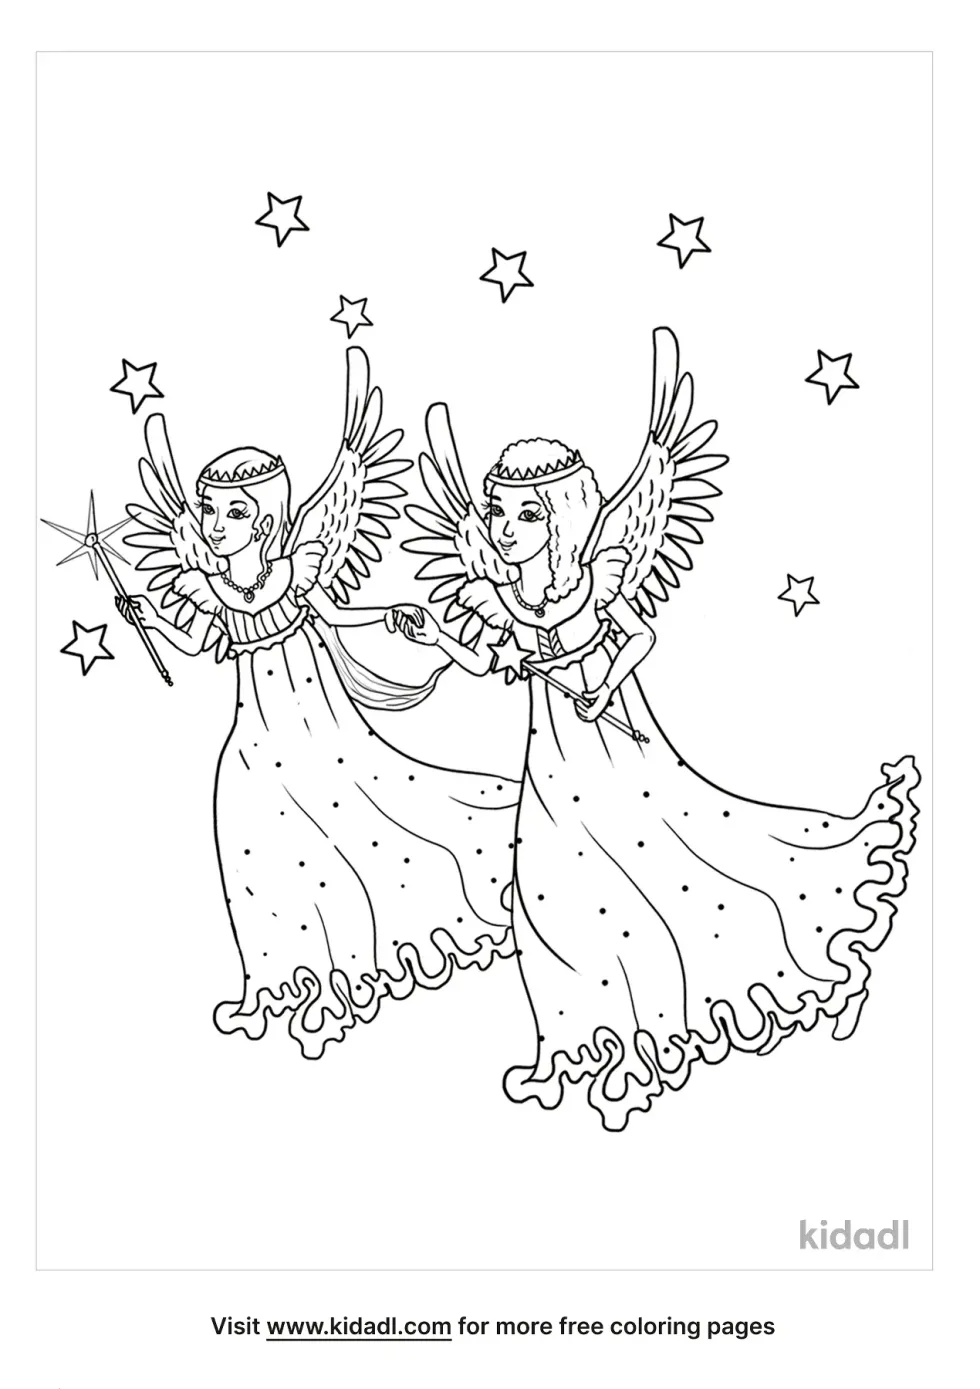 2 Angels Holding Onto On Another Coloring Page